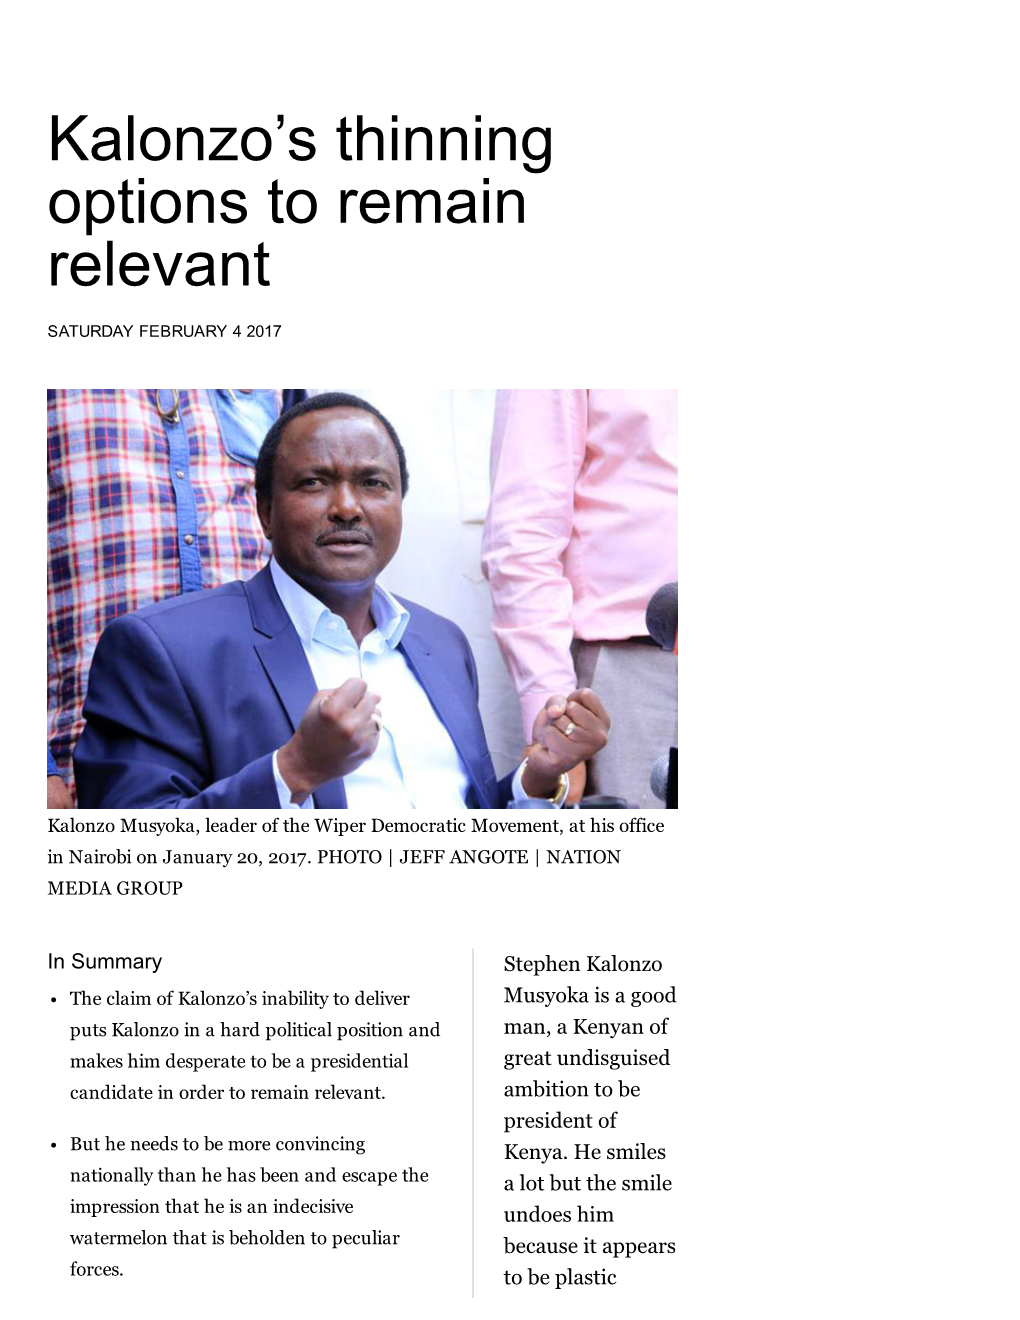 Kalonzo's Thinning Options to Remain Relevant